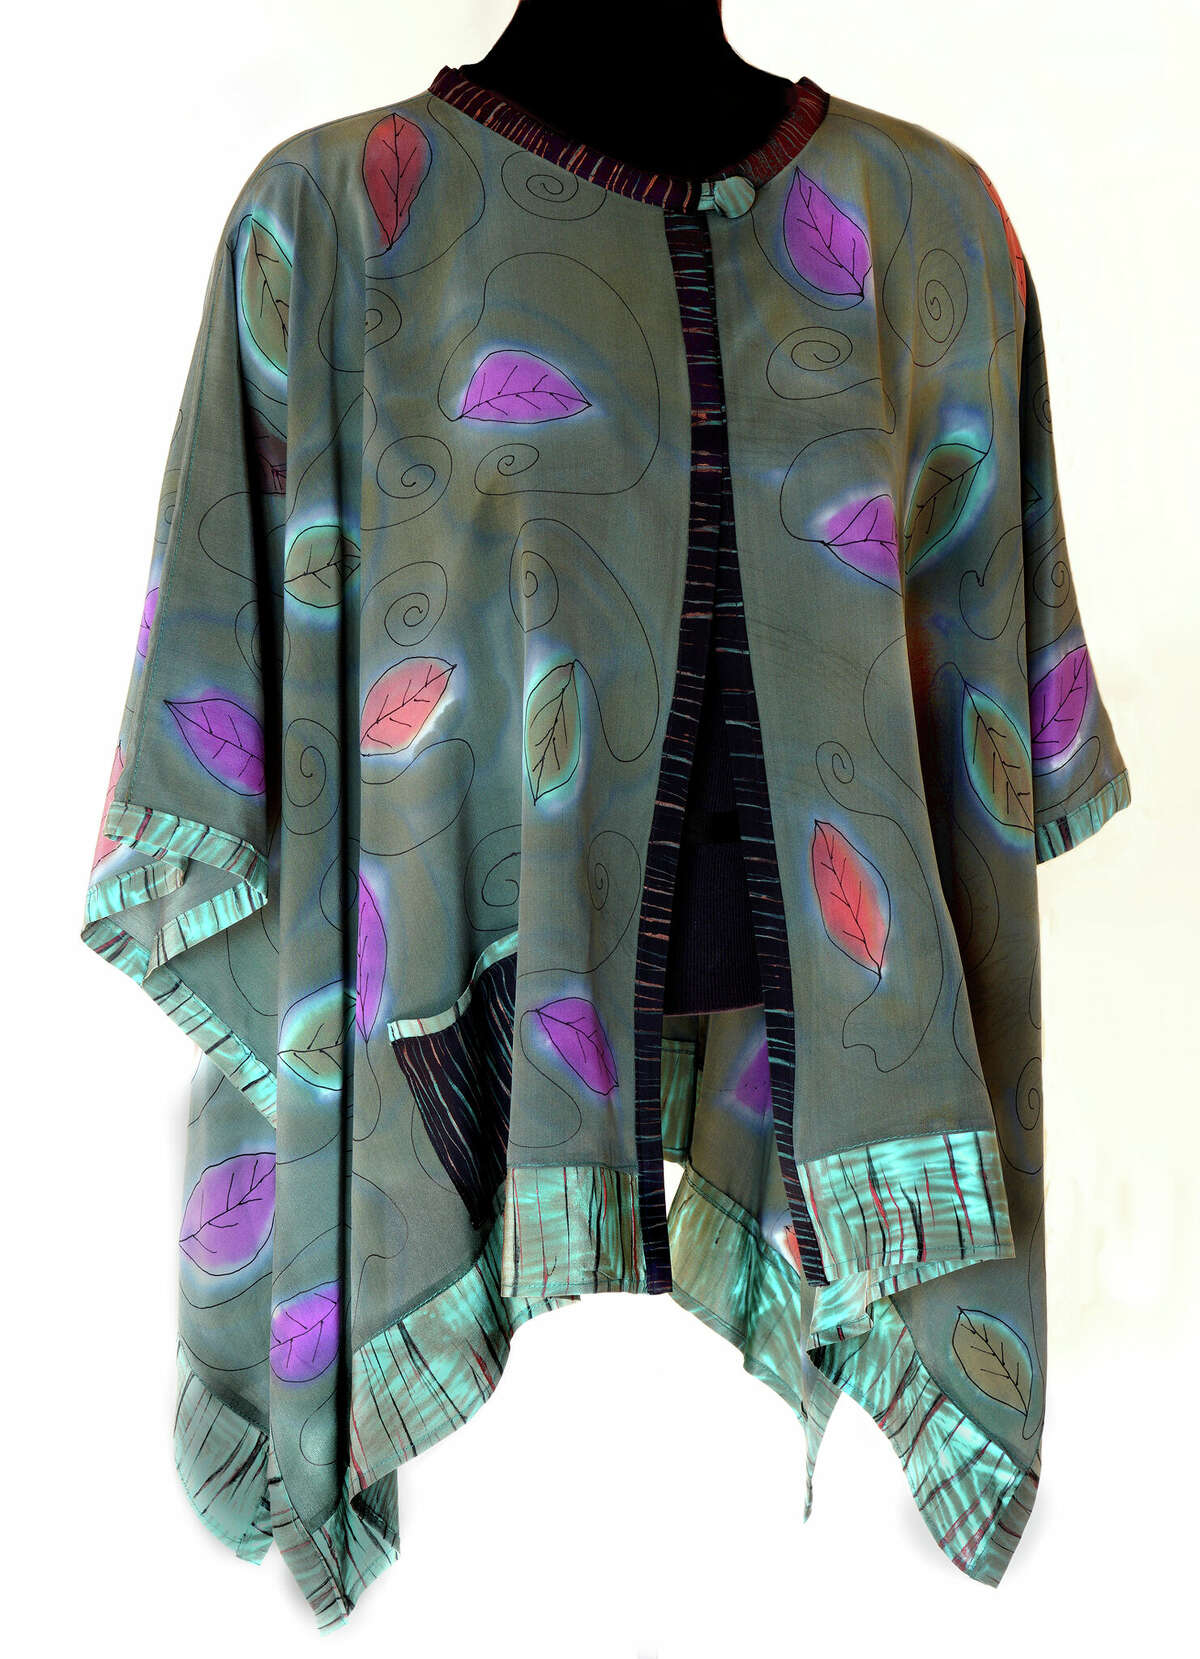 This jacket is by fiber artist Pat Rued, whose wearable art pieces will be featured during March at the David Strawn Art Gallery.